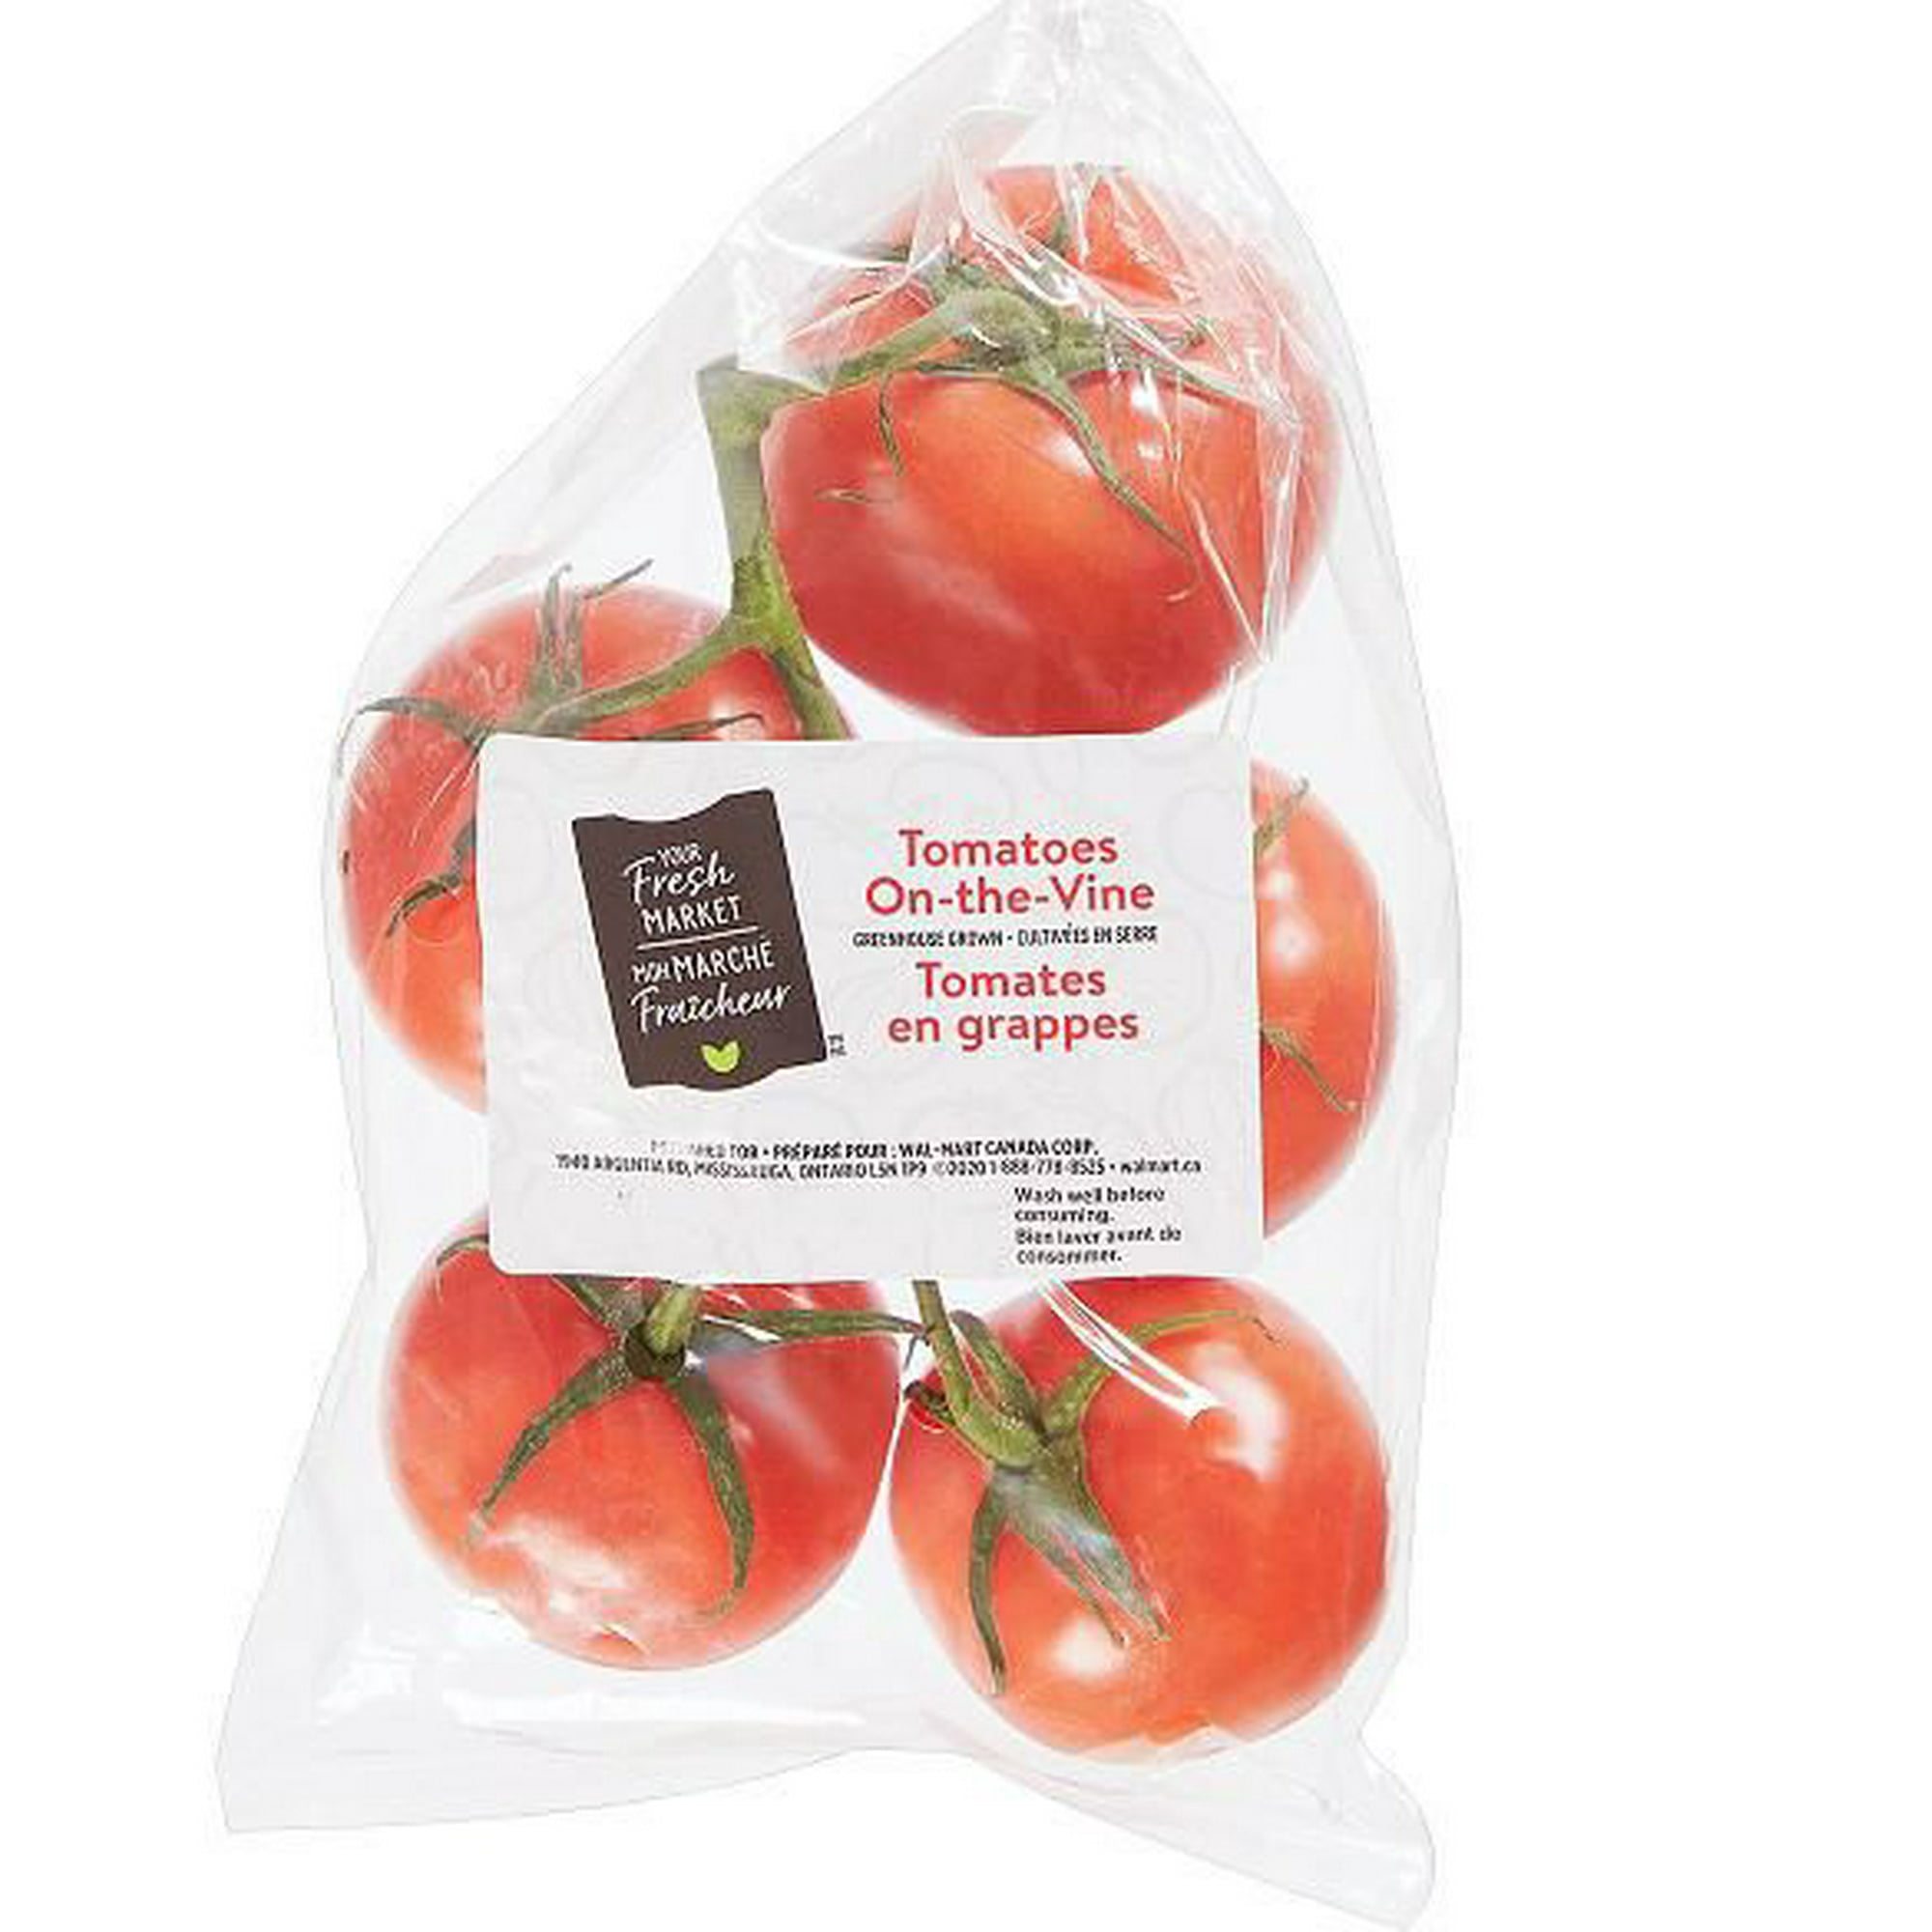 Best-Fashion-Accessories - The Three Tomatoes